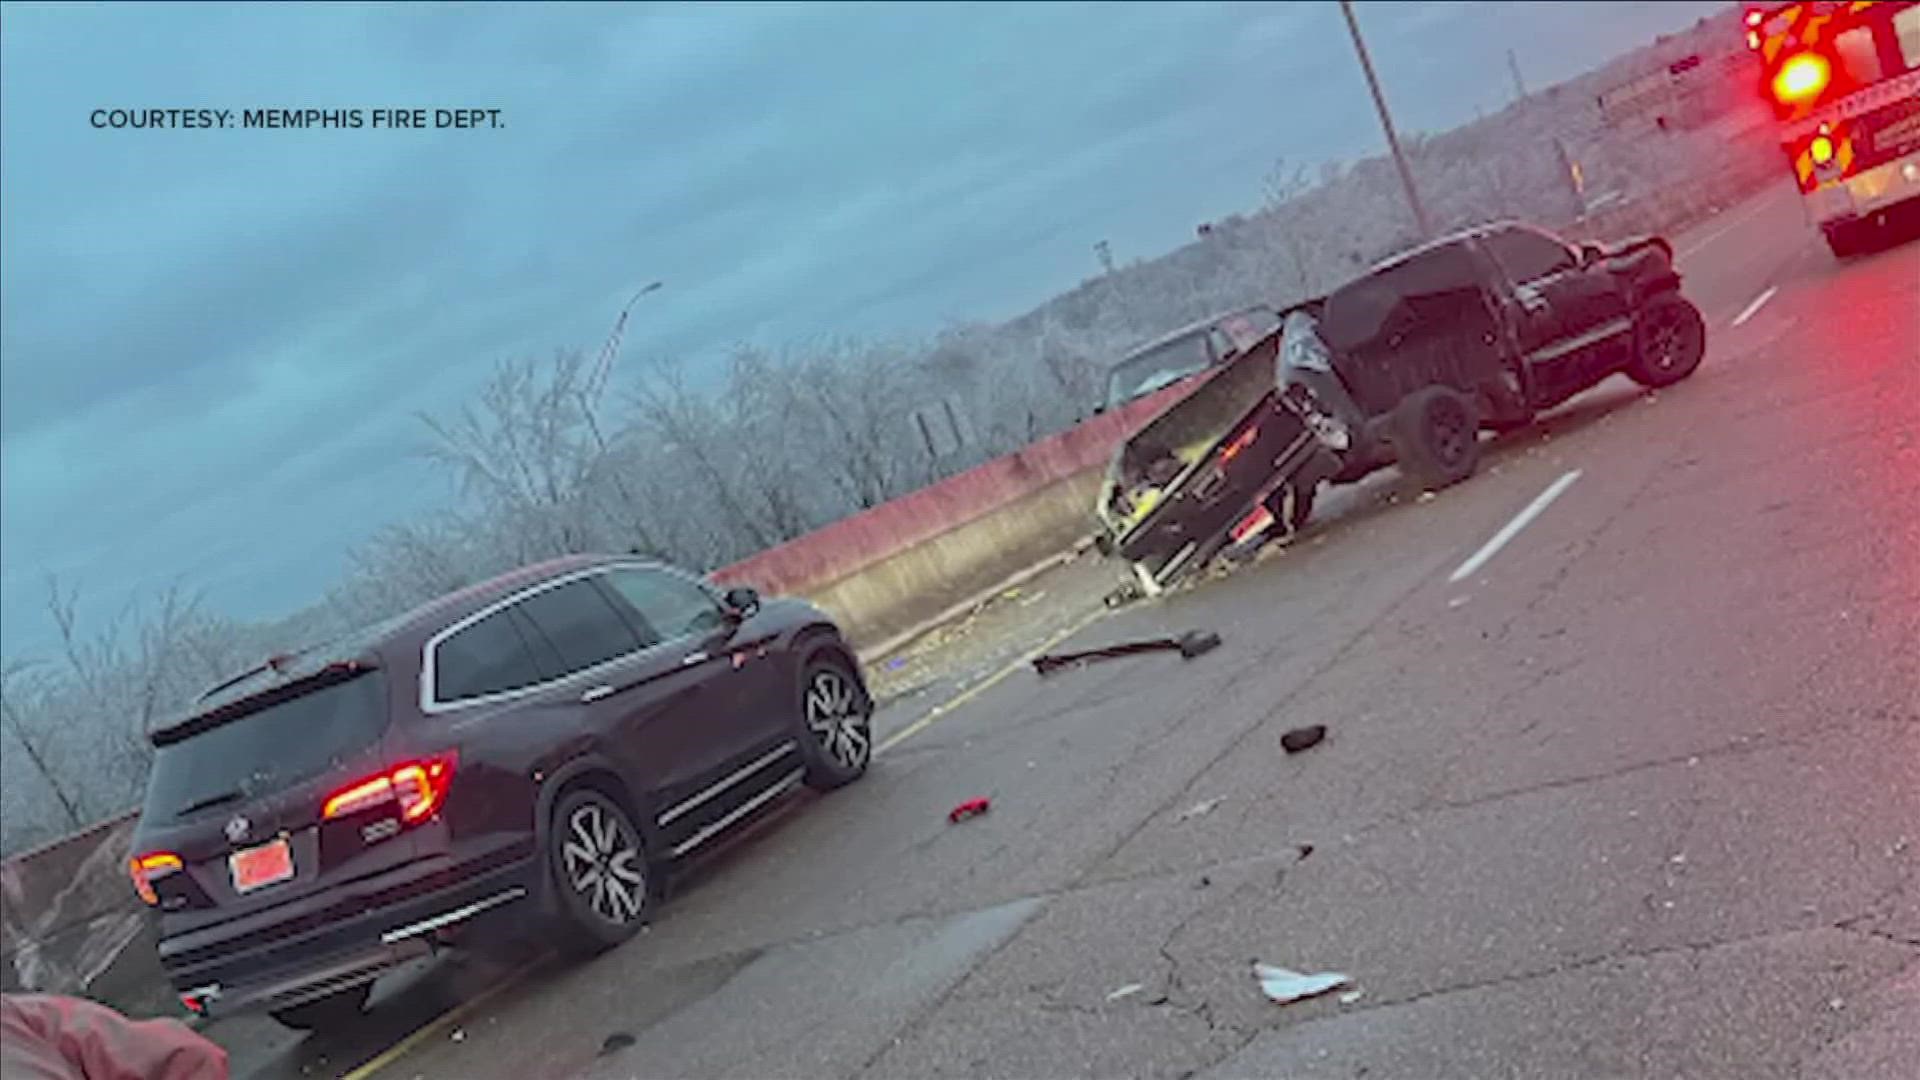 Thursday afternoon, car after car could be seen wrecked as cameras caught footage of a rare 16-car pileup on Austin Peay Highway and James Road